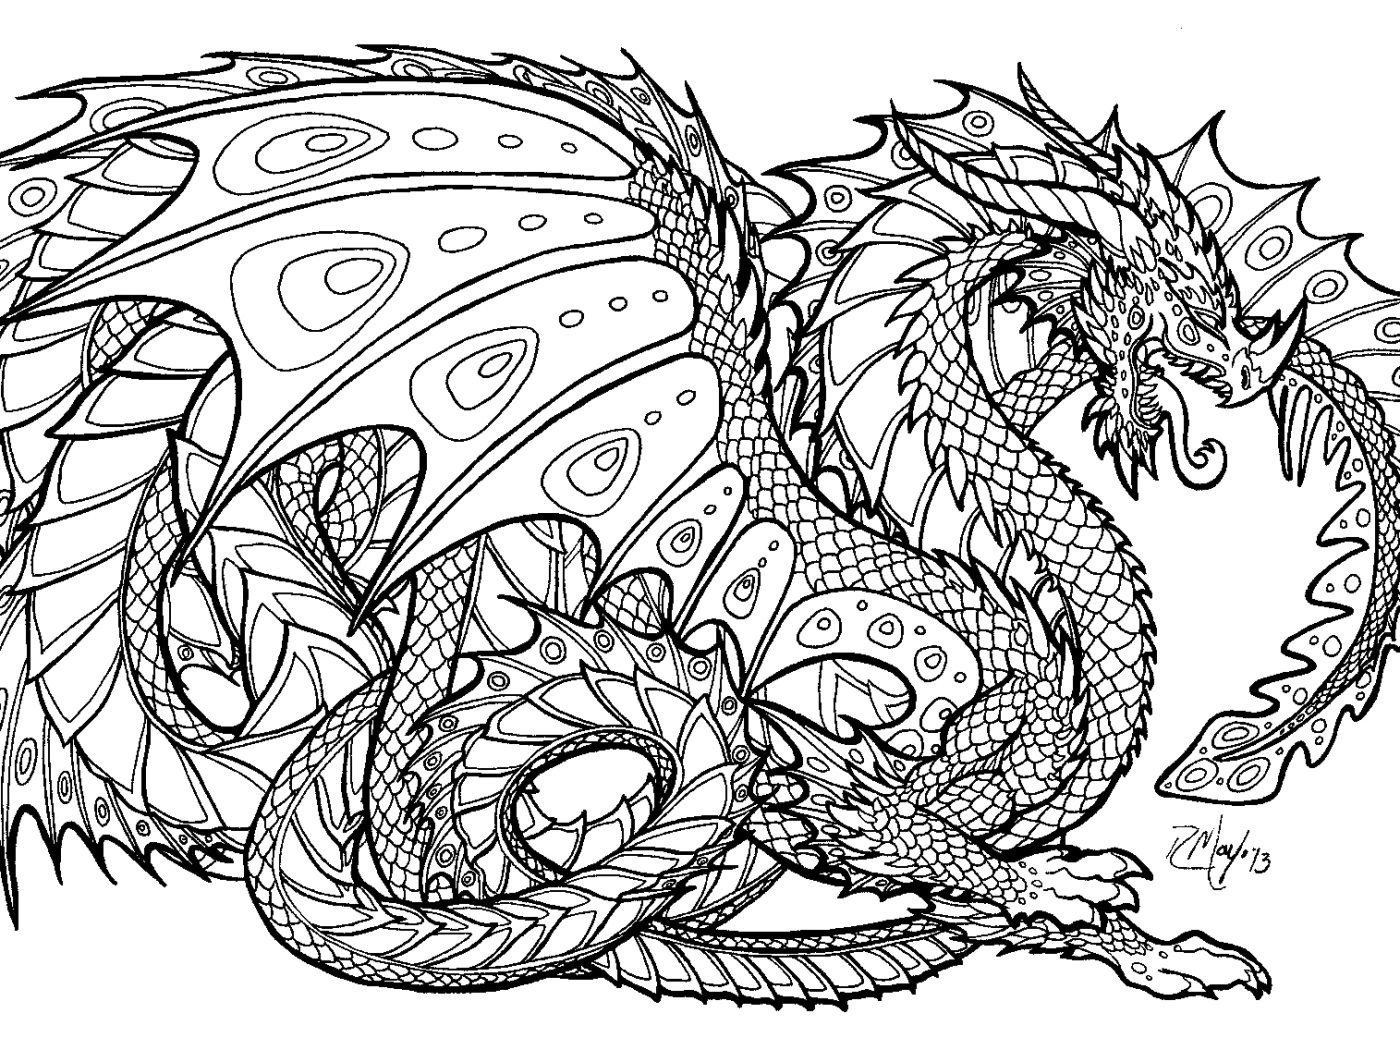 Hard Animal Coloring Pages Coloring Ideas Hard Adult Coloring Pages New Animals For Adults